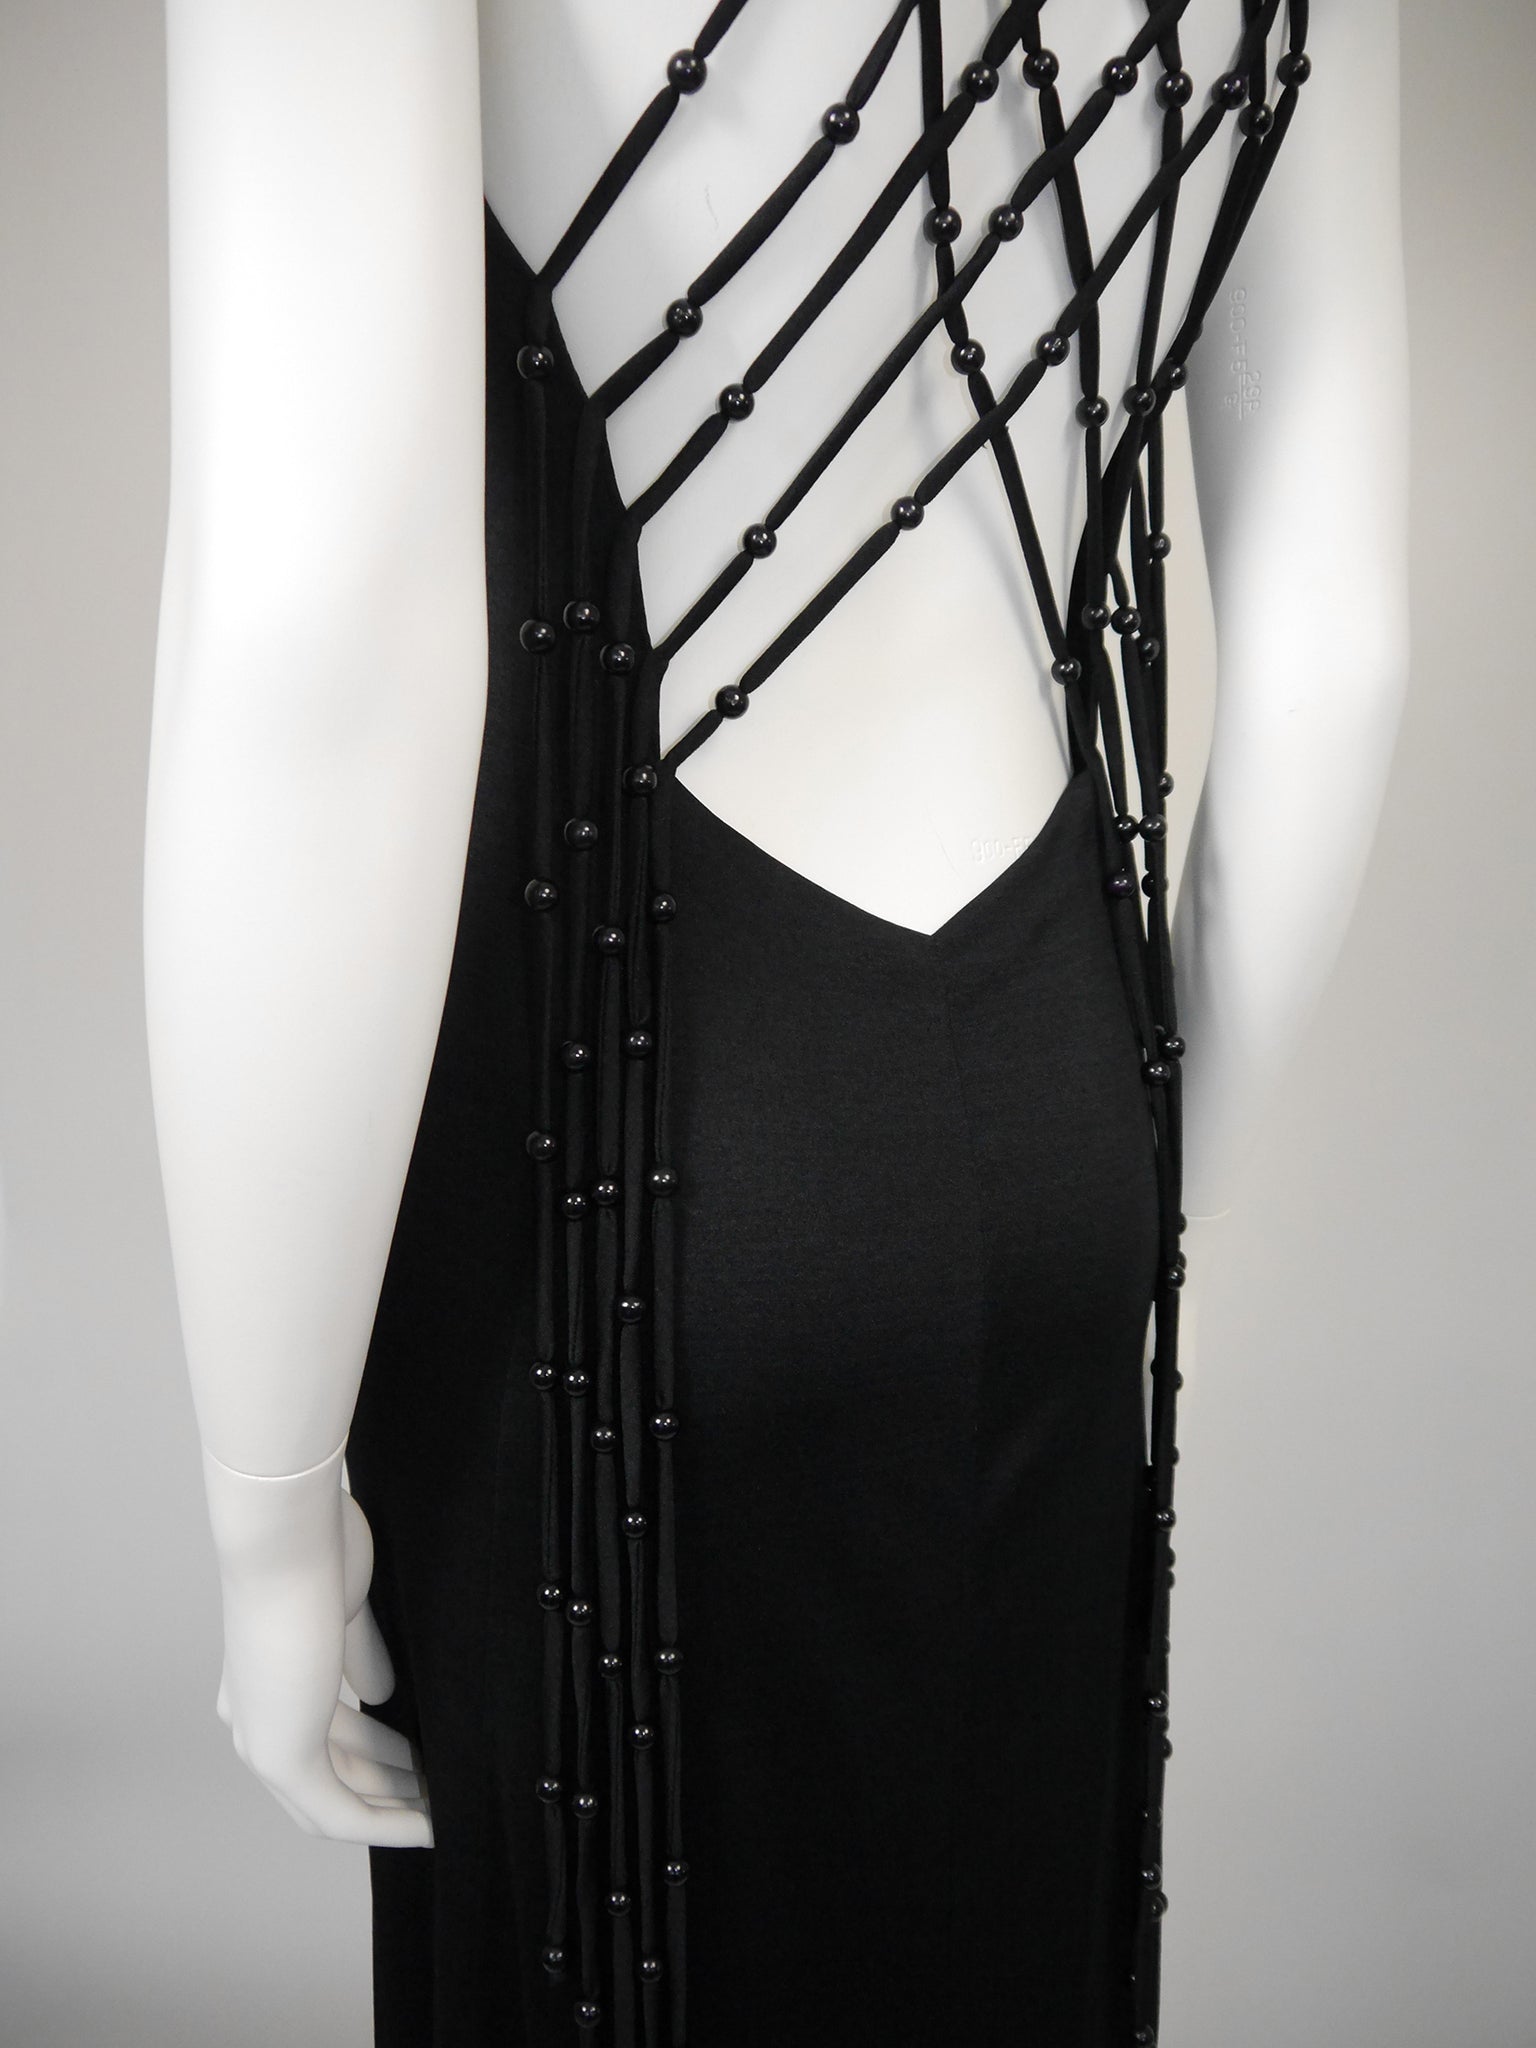 LORIS AZZARO 1970s Vintage "Baba" Beaded Backless Maxi Evening Gown Size S